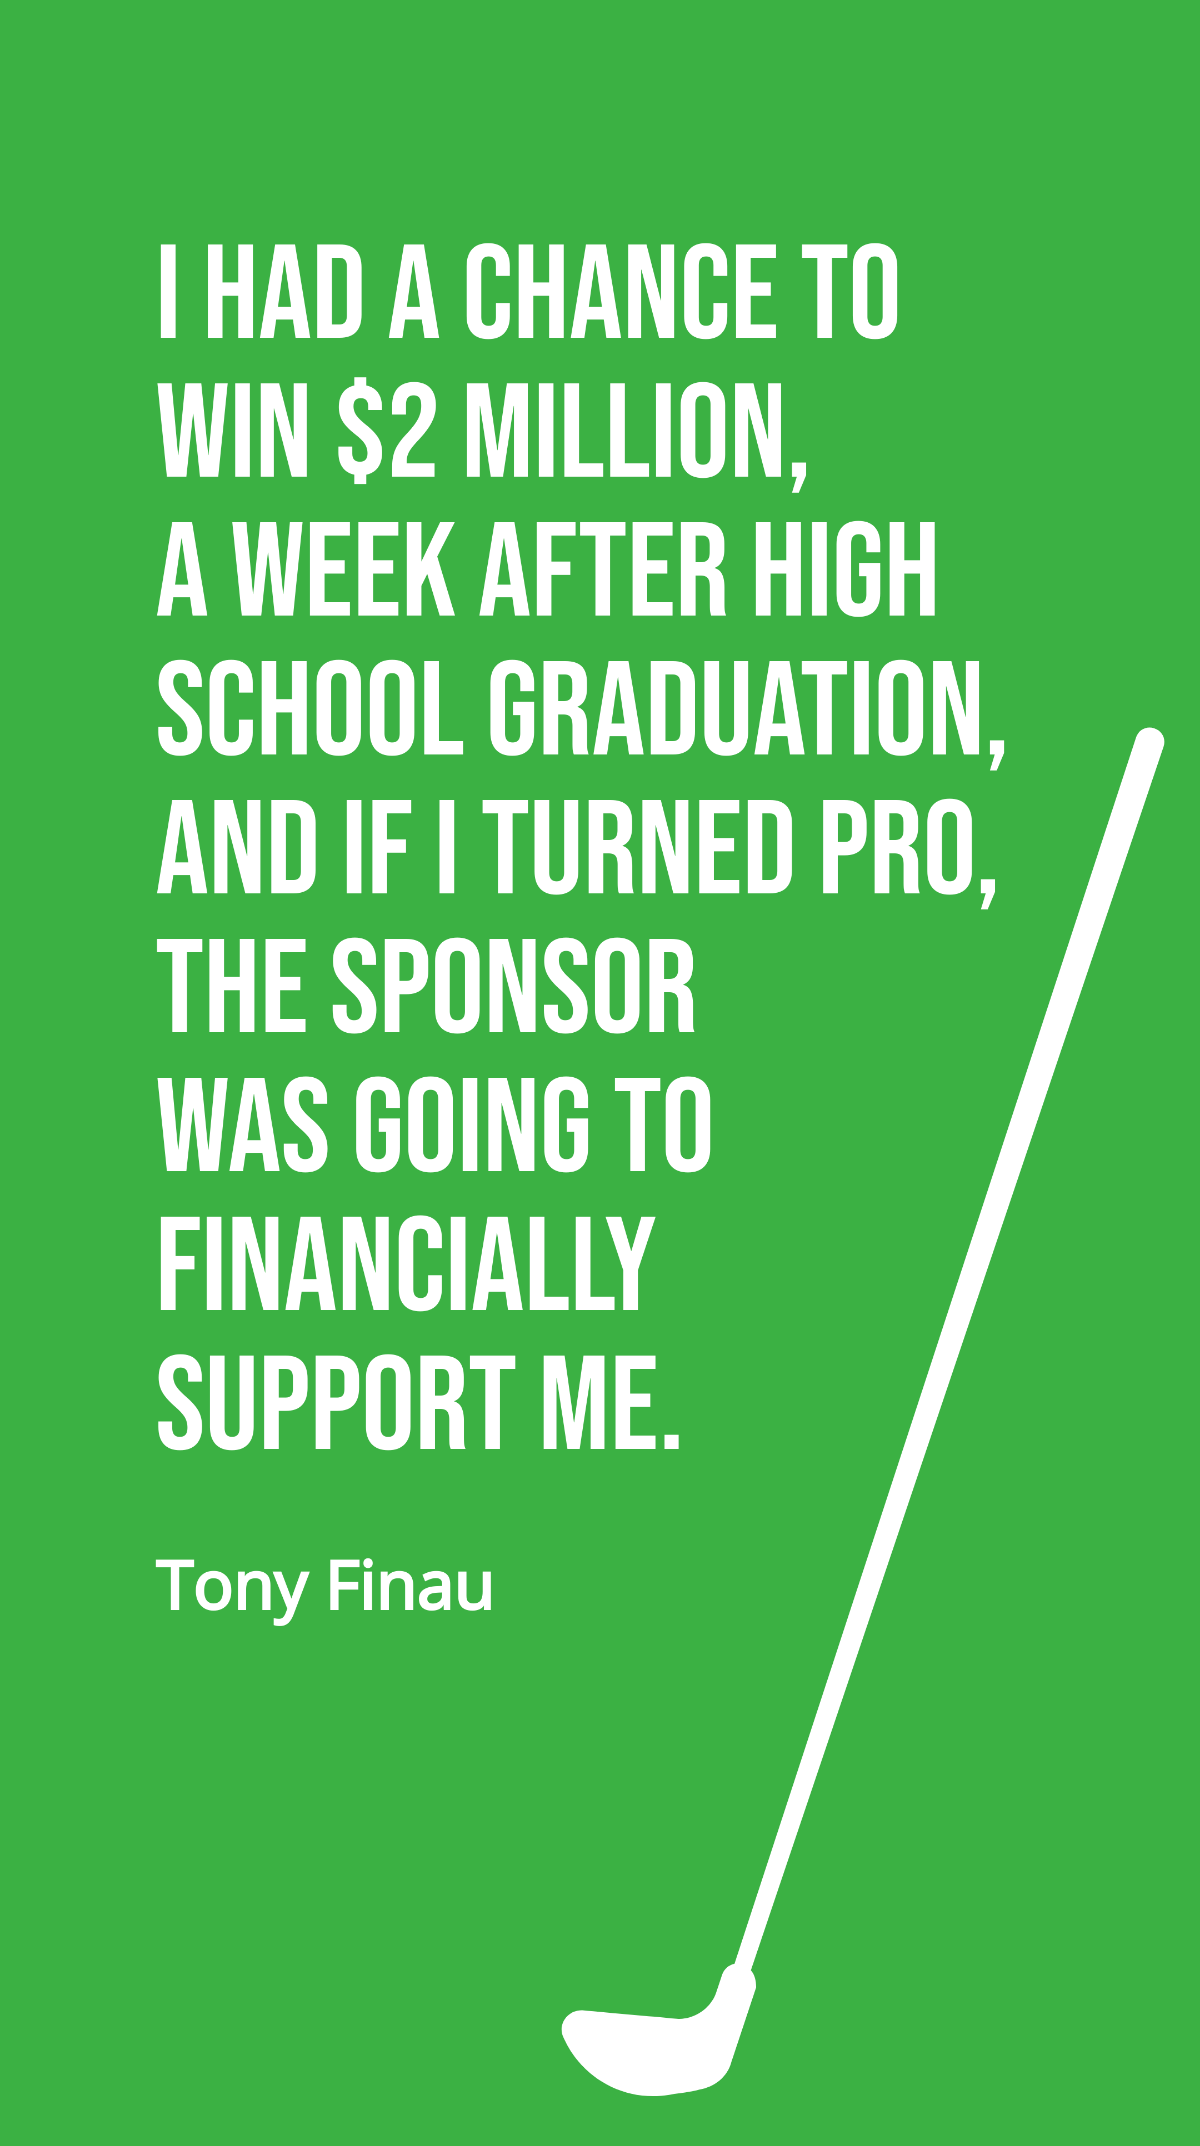 Tony Finau - I had a chance to win $2 million, a week after high school graduation, and if I turned pro, the sponsor was going to financially support me. Template